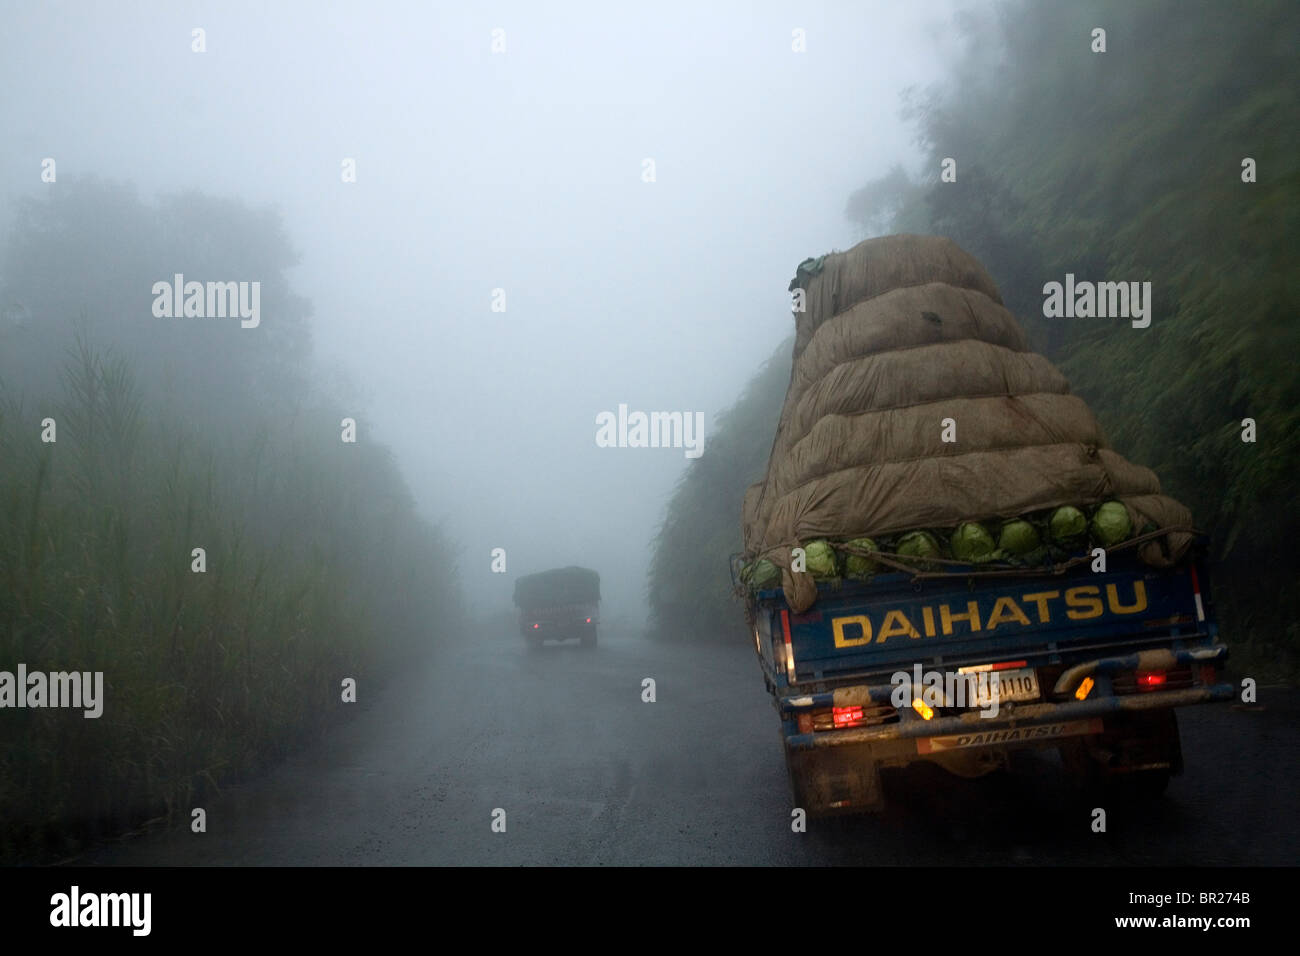 A truck transports produce on a foggy mountain road Stock Photo